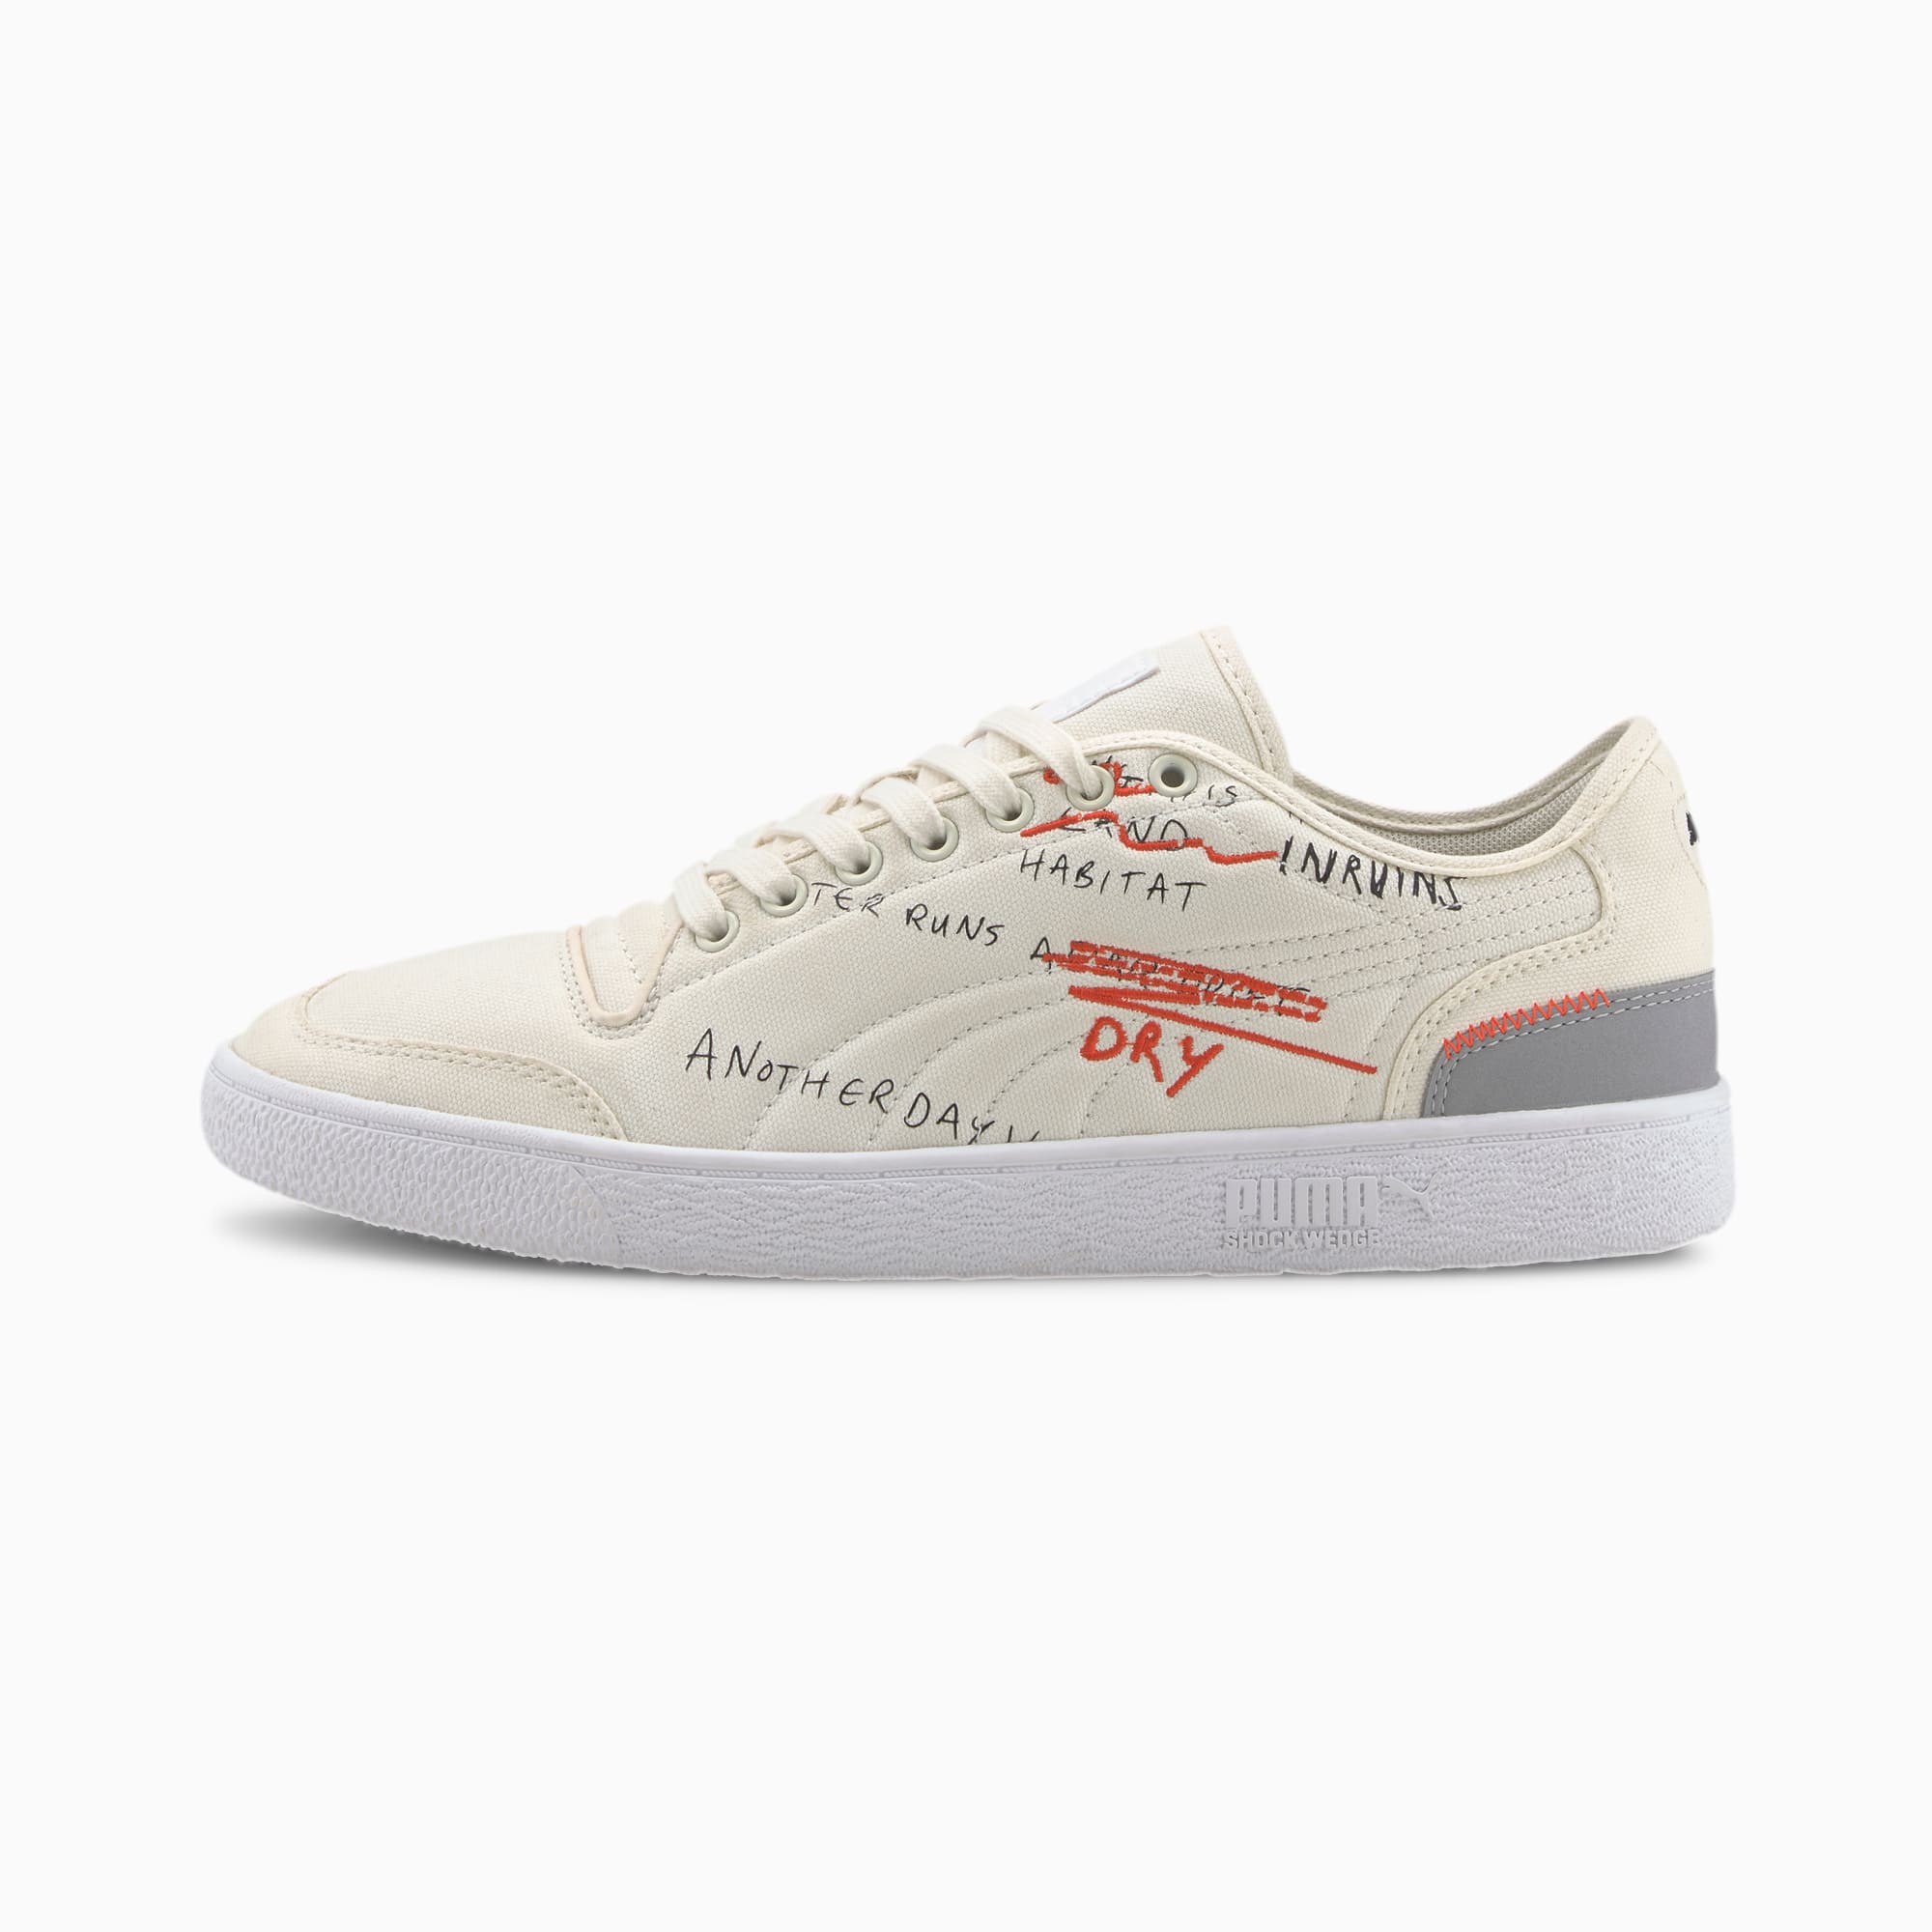 puma sneakers for ladies south africa